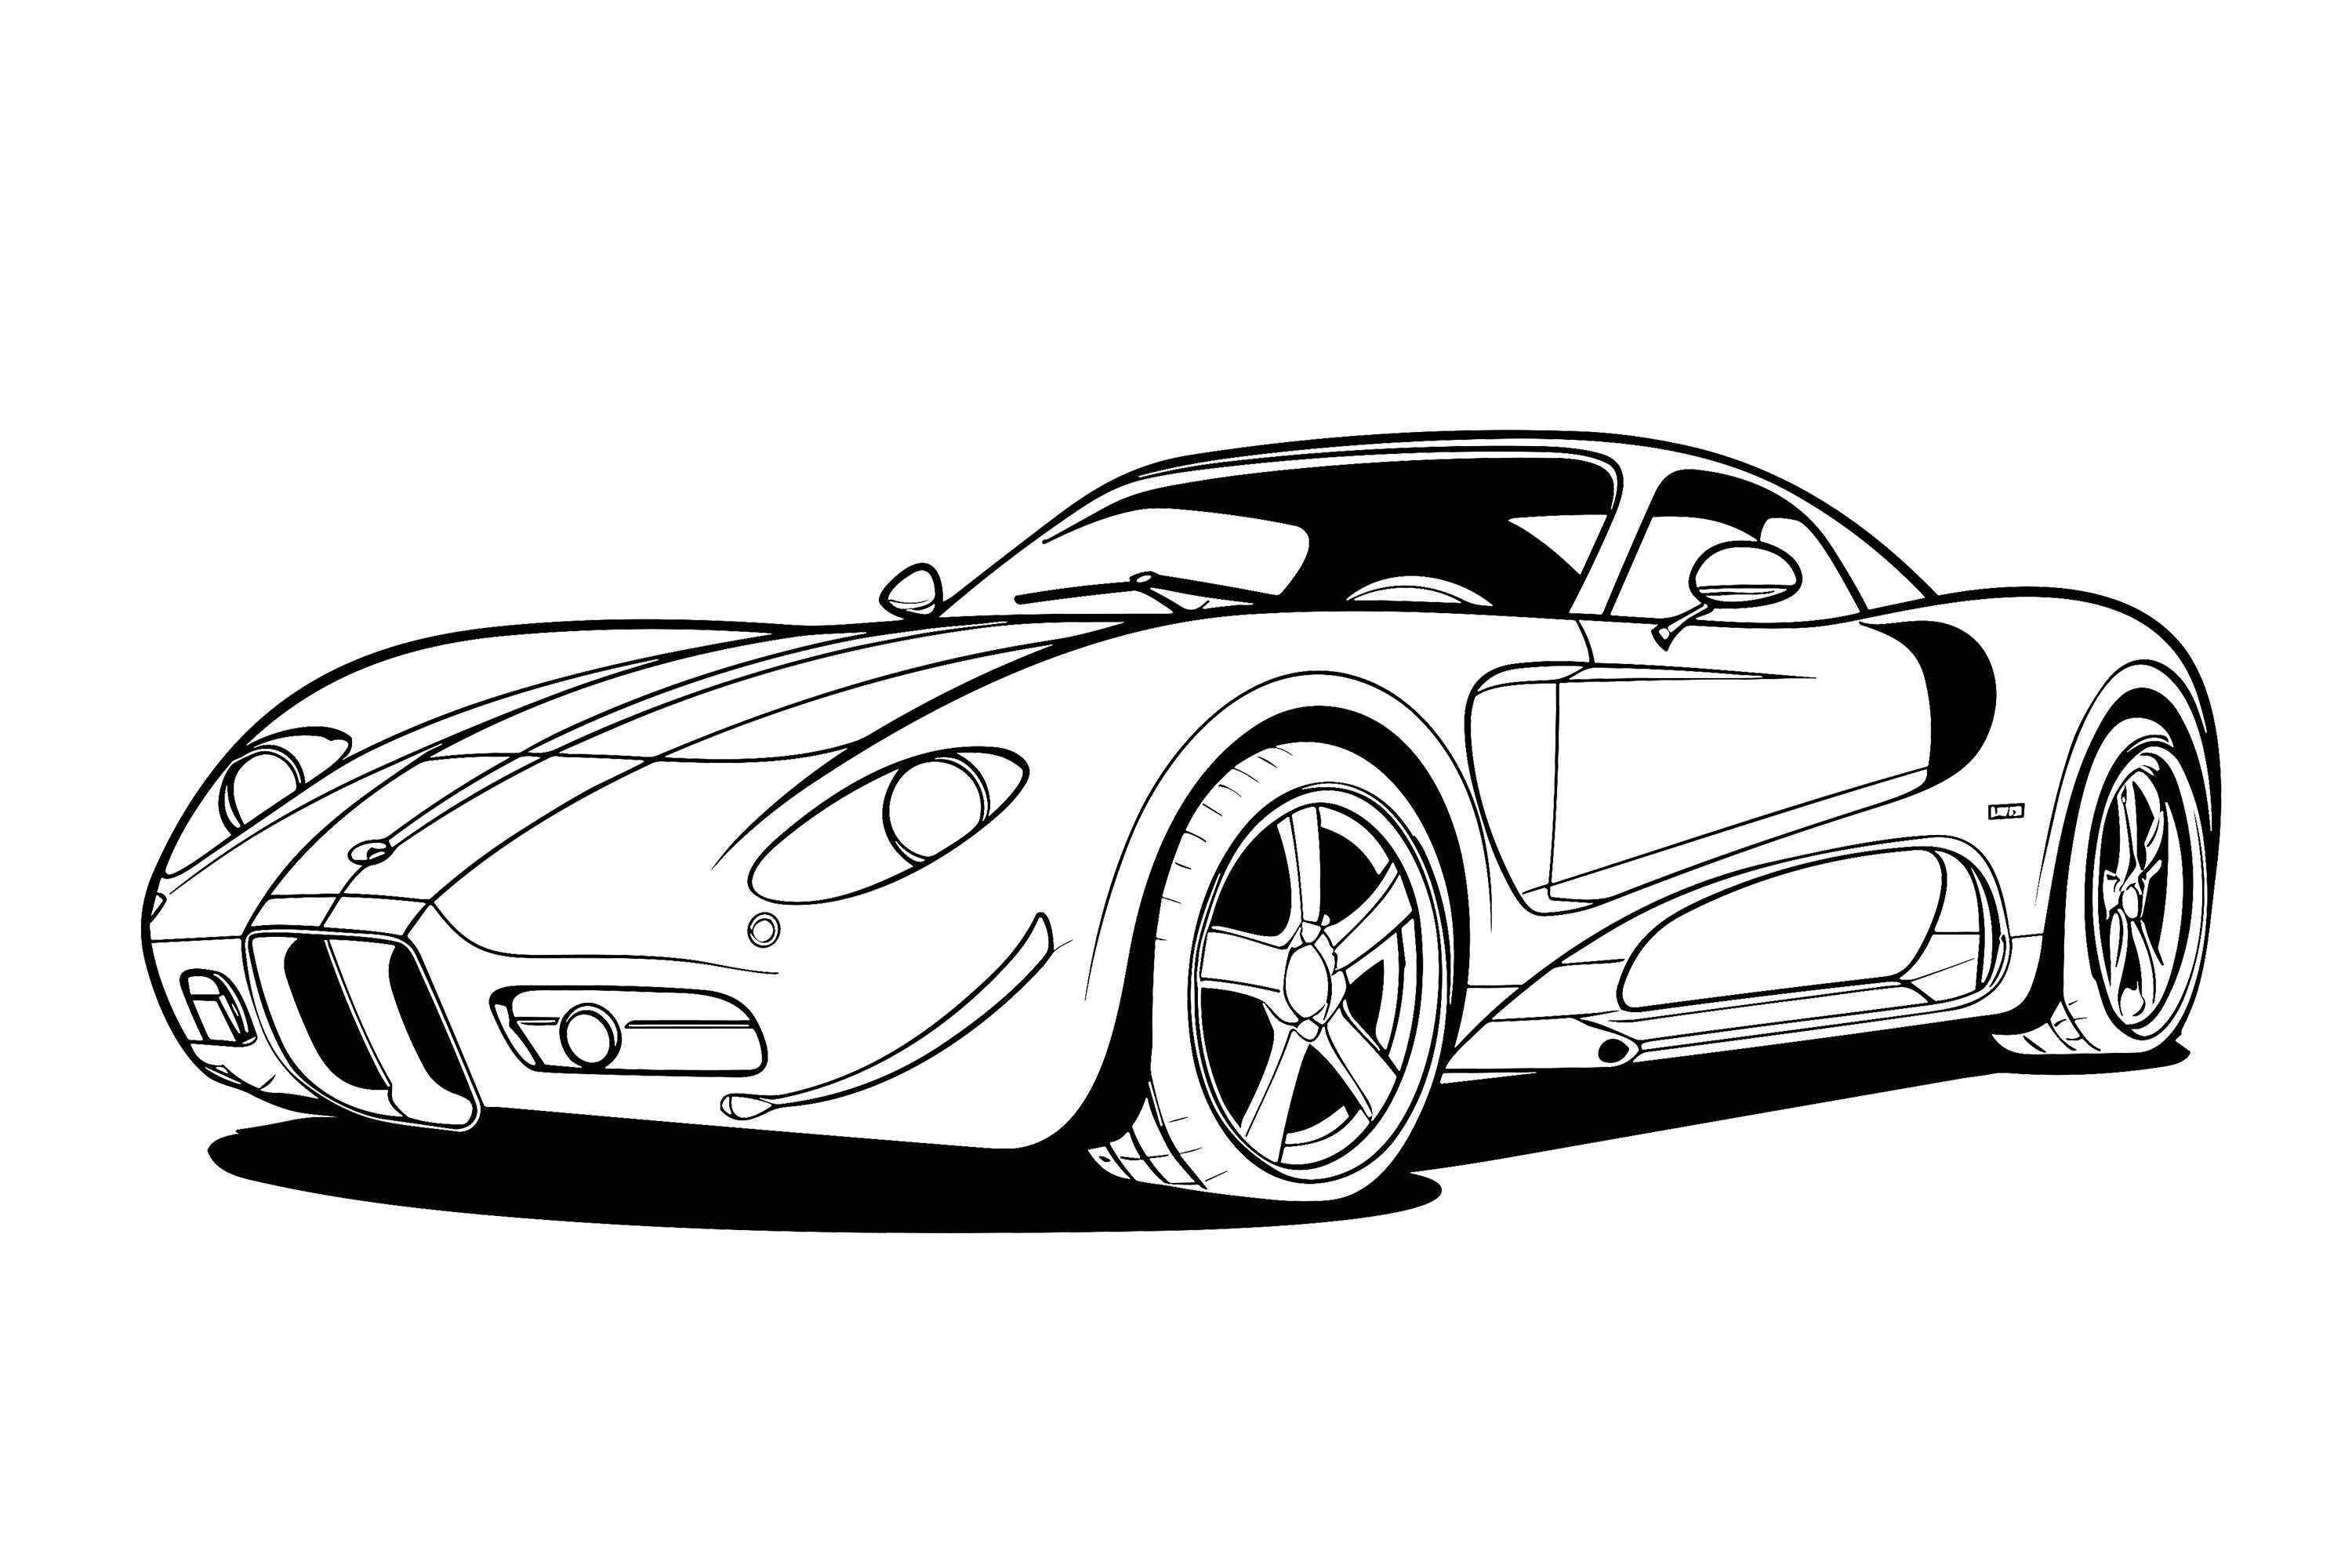 B W Car Clipart Graphic by Illustrately · Creative Fabrica